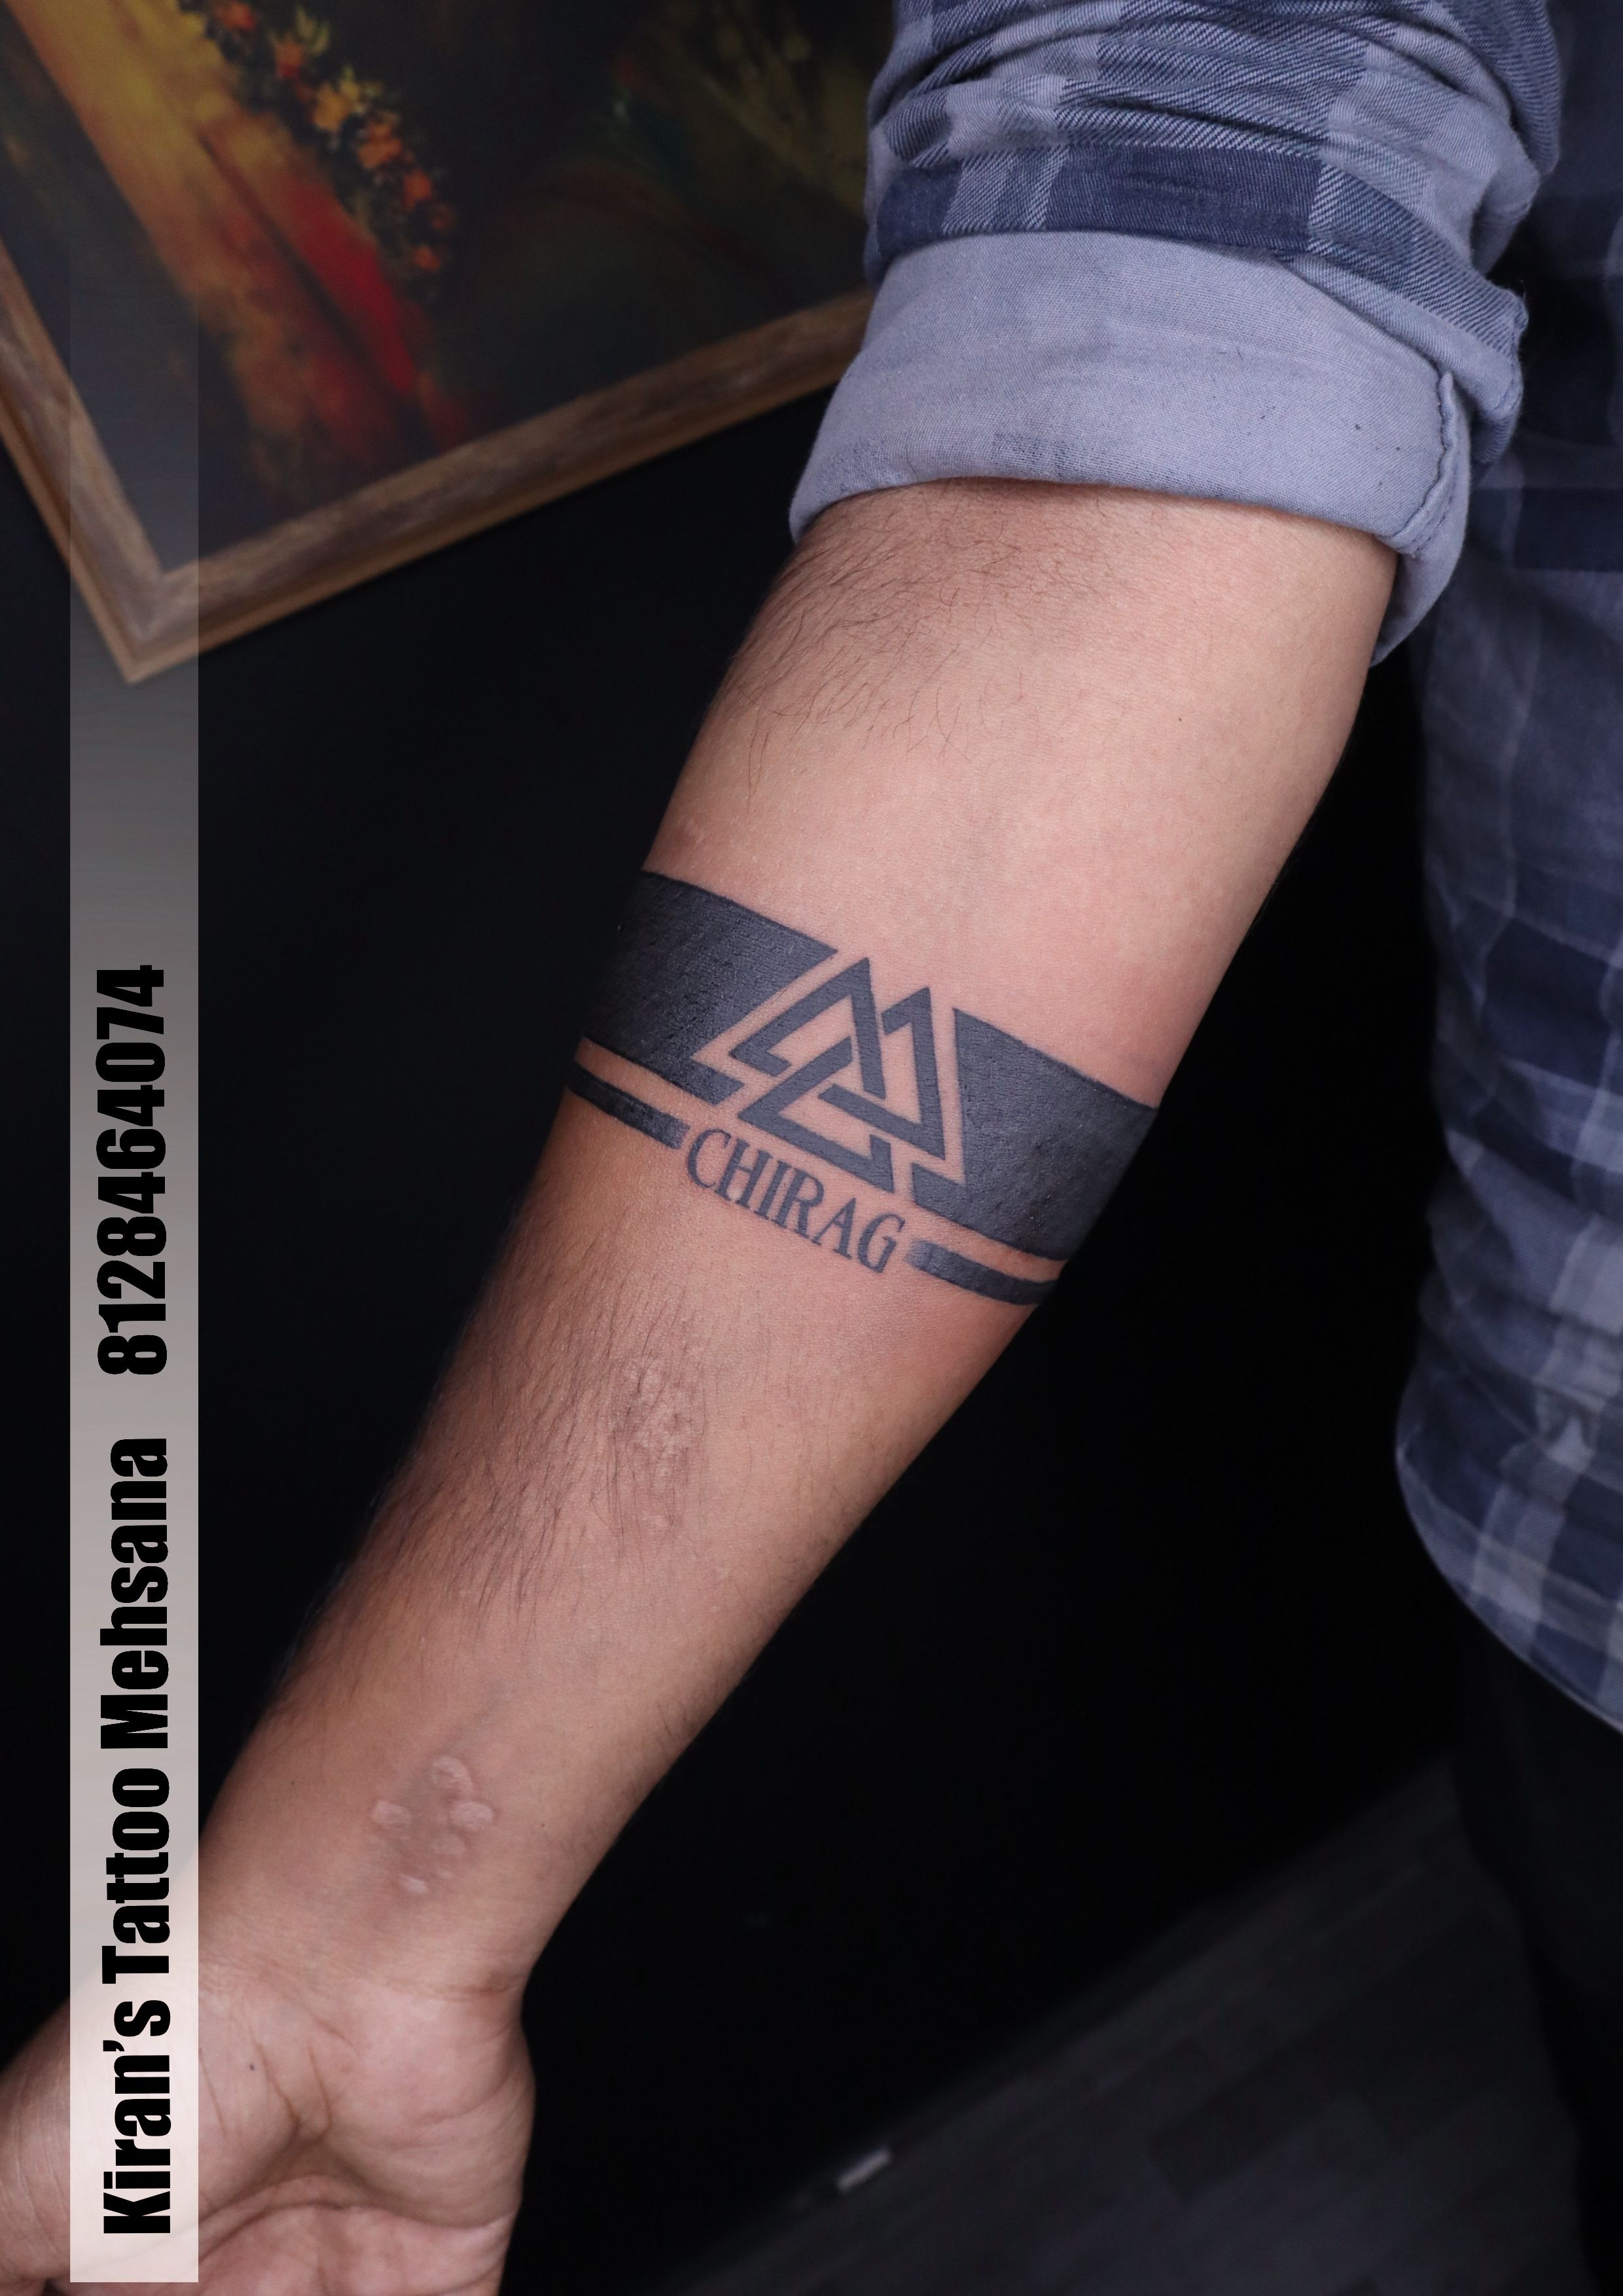 Solid Arm Band Tattoo by blackpoisontattoo on DeviantArt